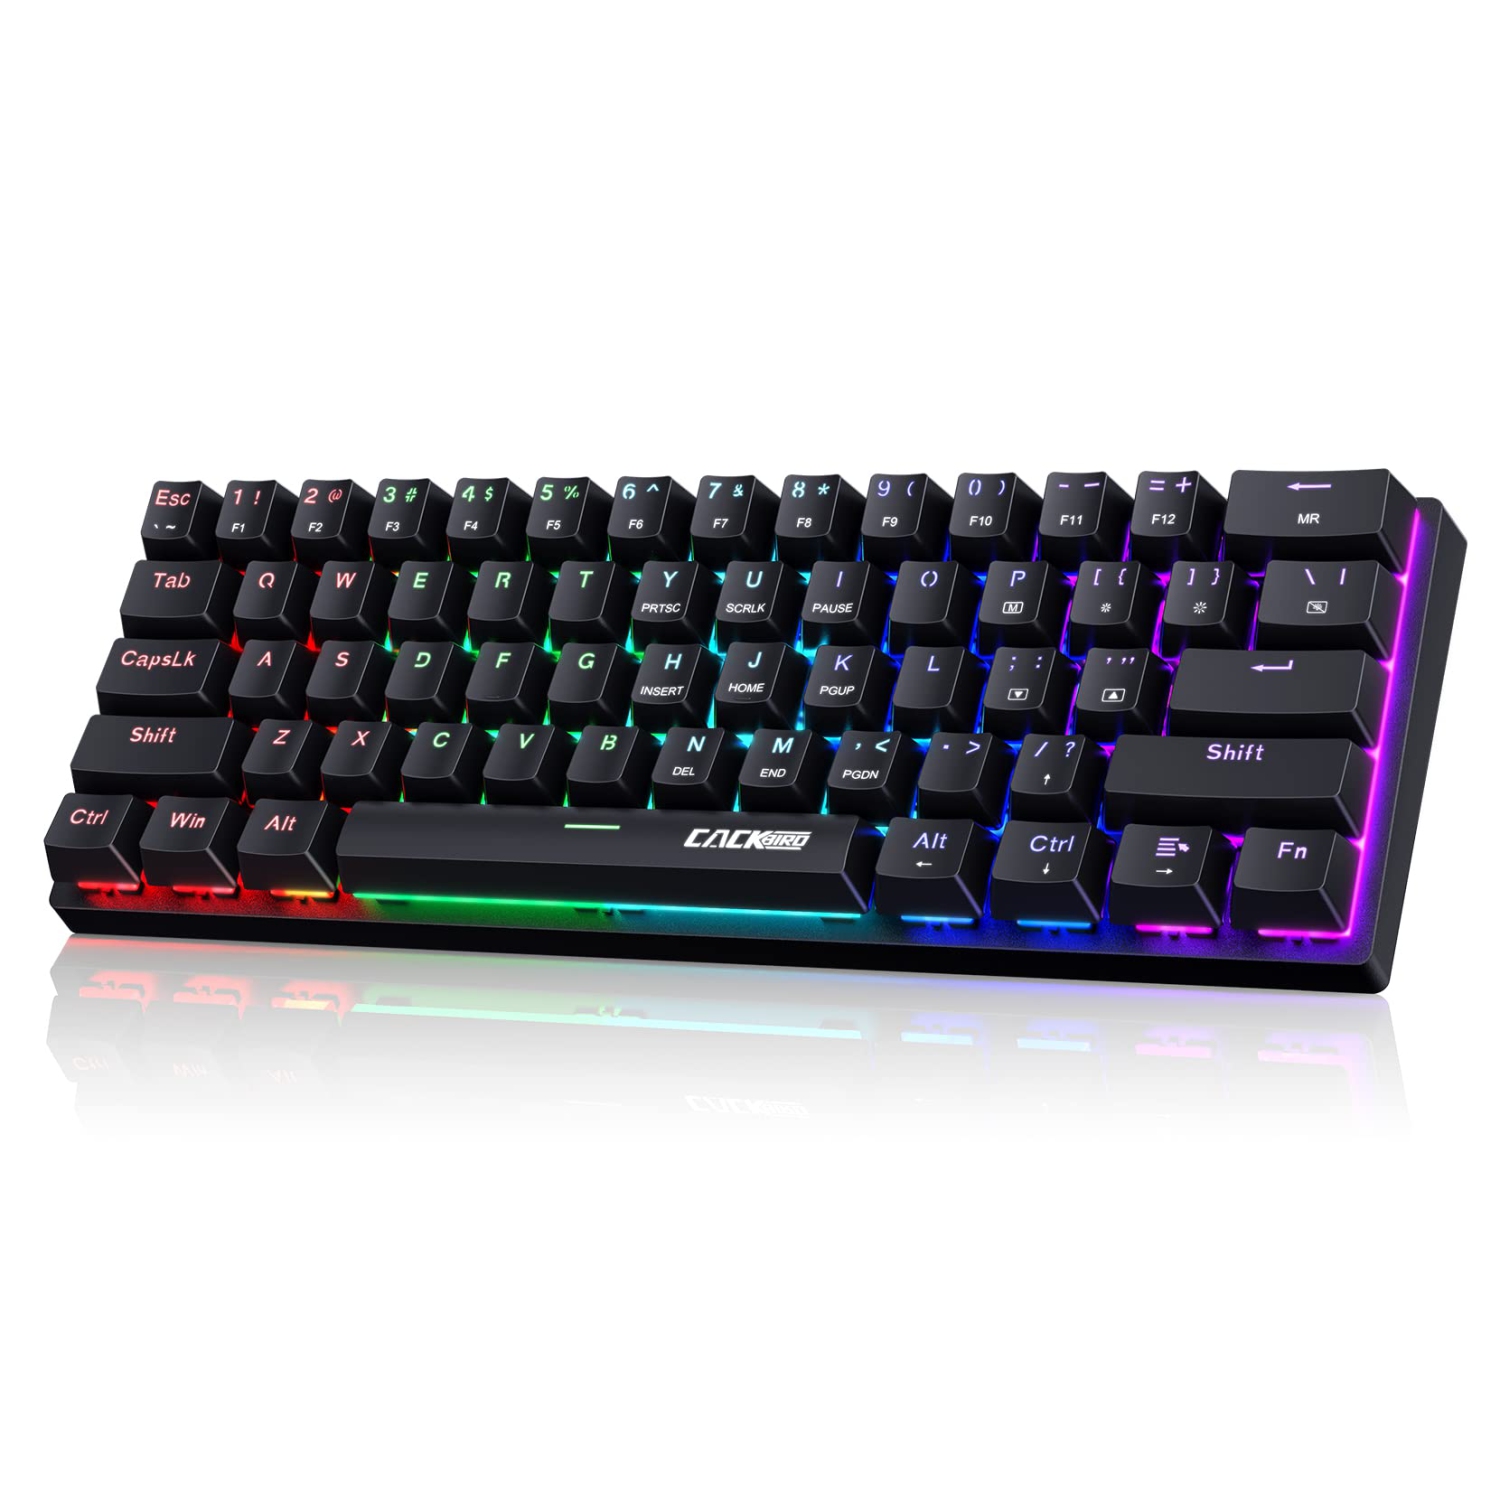 Portable 60% Mechanical Gaming Keyboard,60 Percent Wired Gamer Keyboard with Blue Switches,LED Customization Backlit,61 Keys